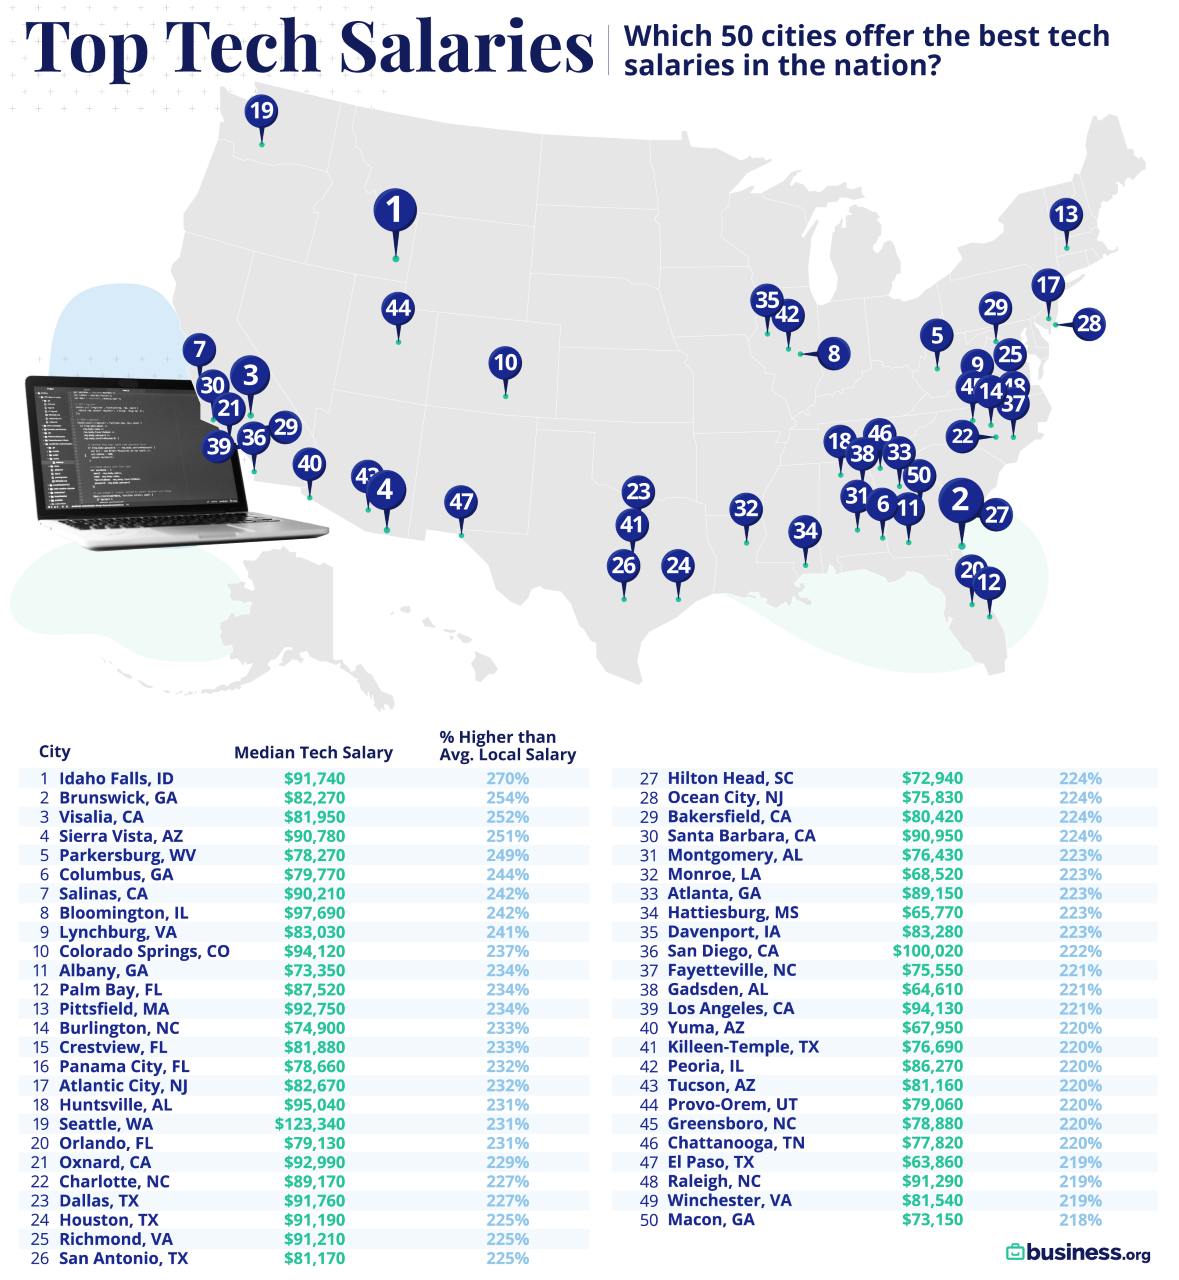 Here are the cities that offer the best tech salaries in the nation